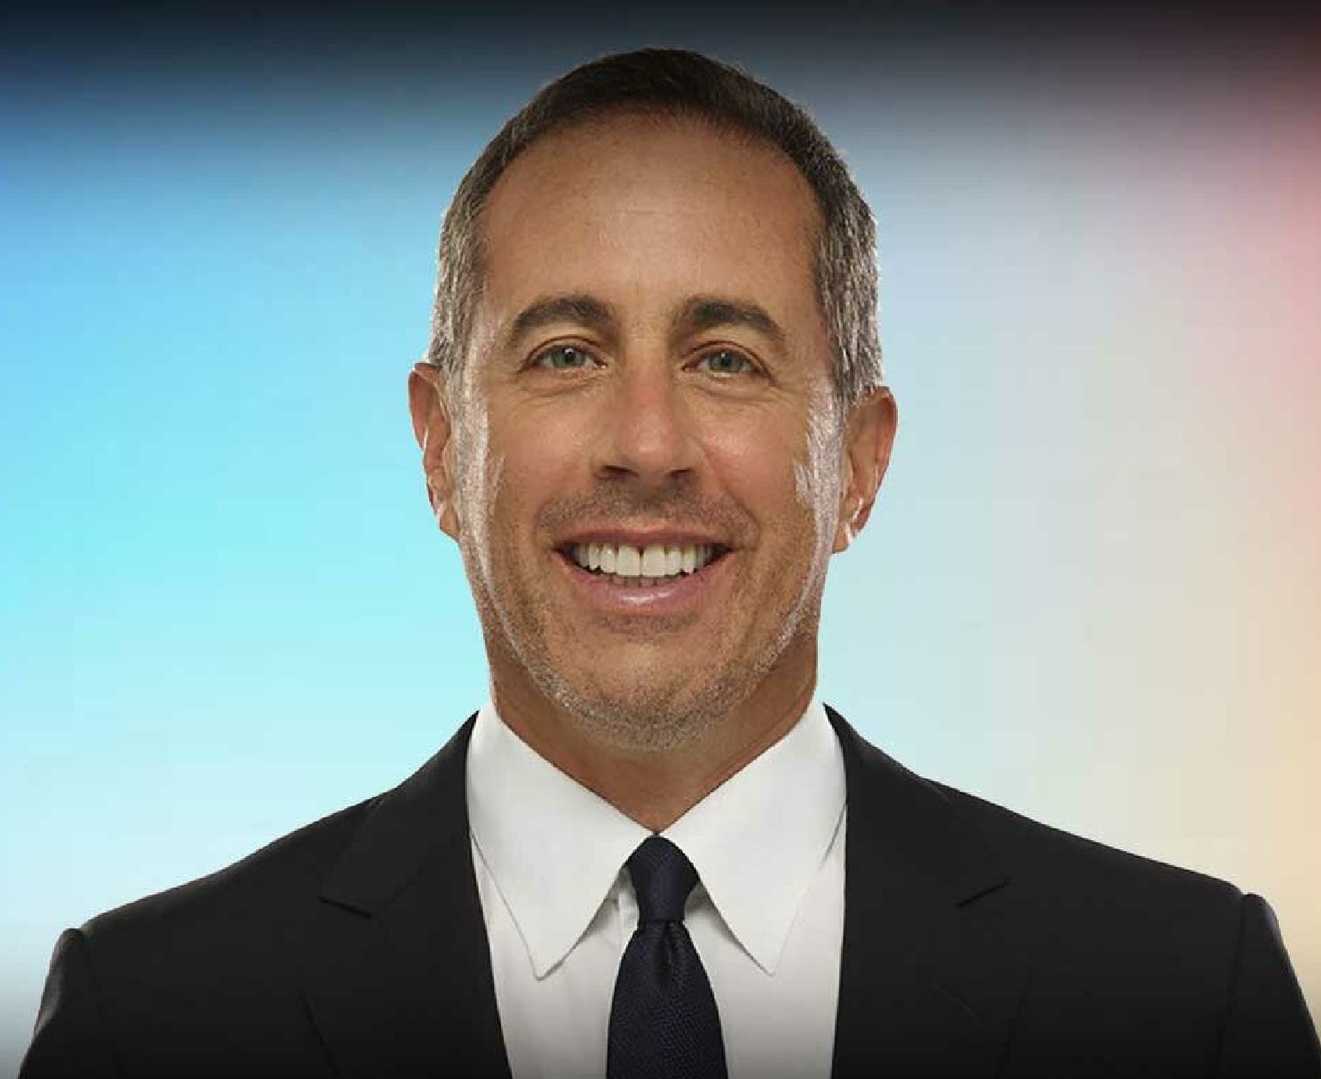 Jerry Seinfeld net worth and career